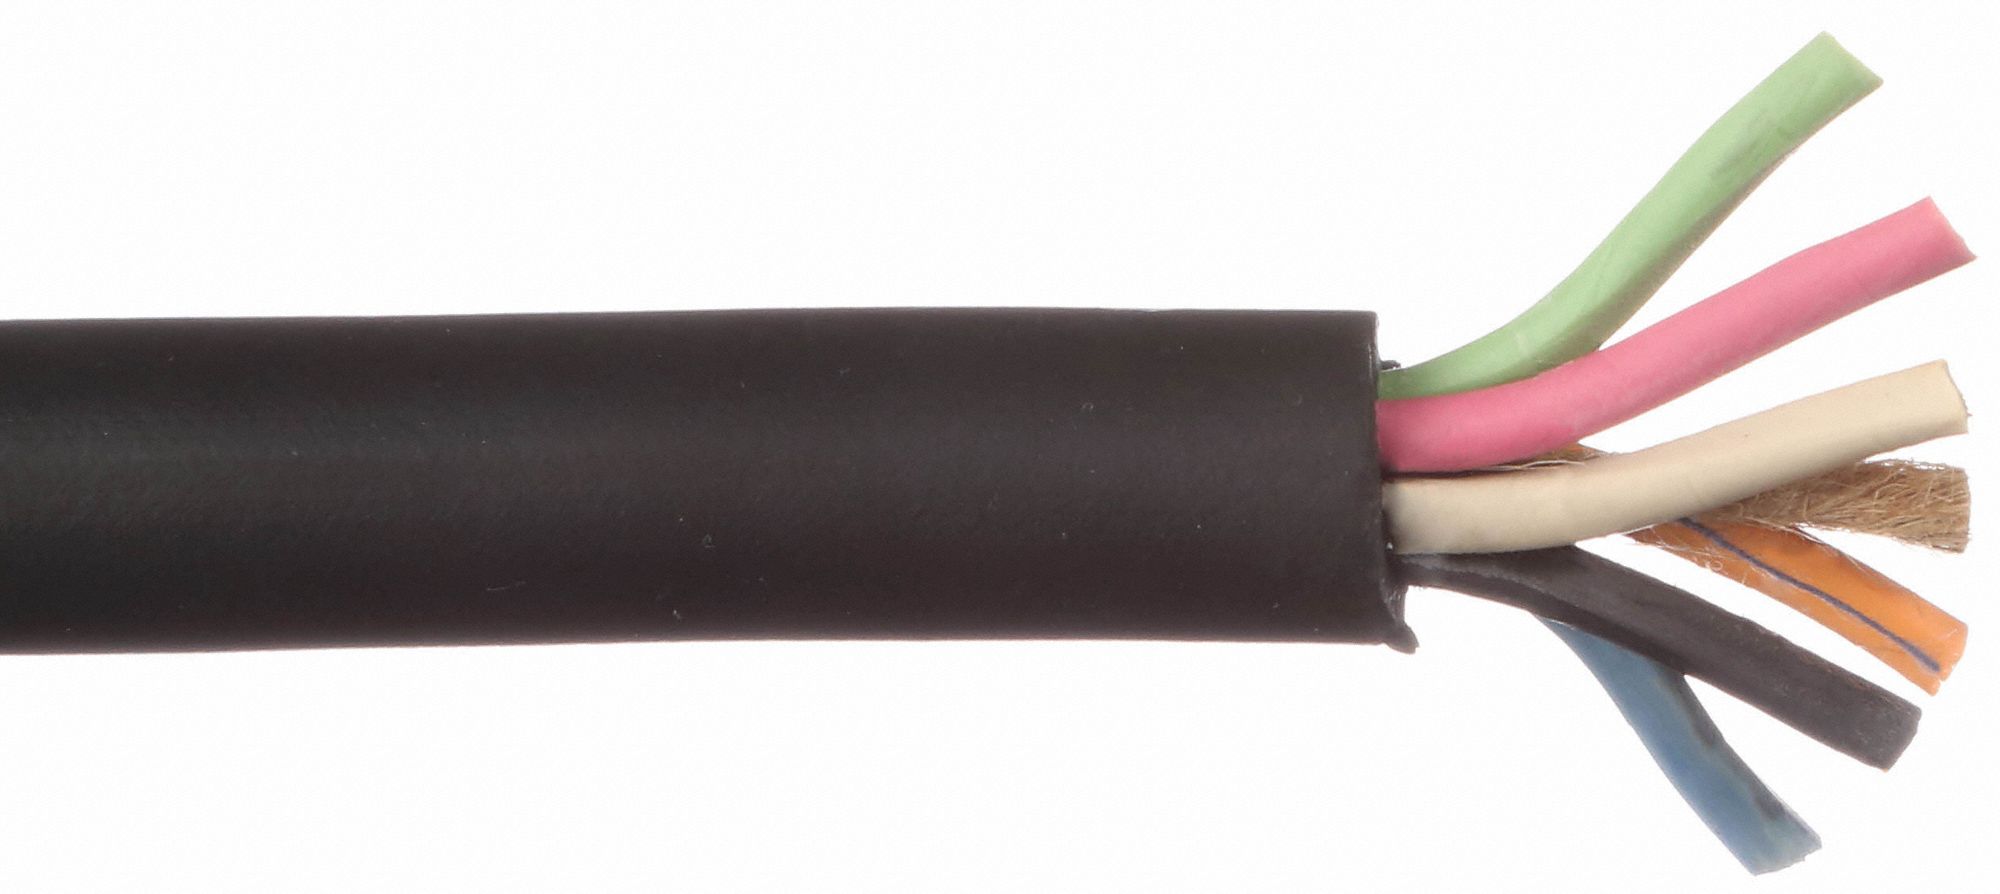 WT16-6 Trailer Cable, Stranded Bare Copper, 16/6 Gauge/conductors